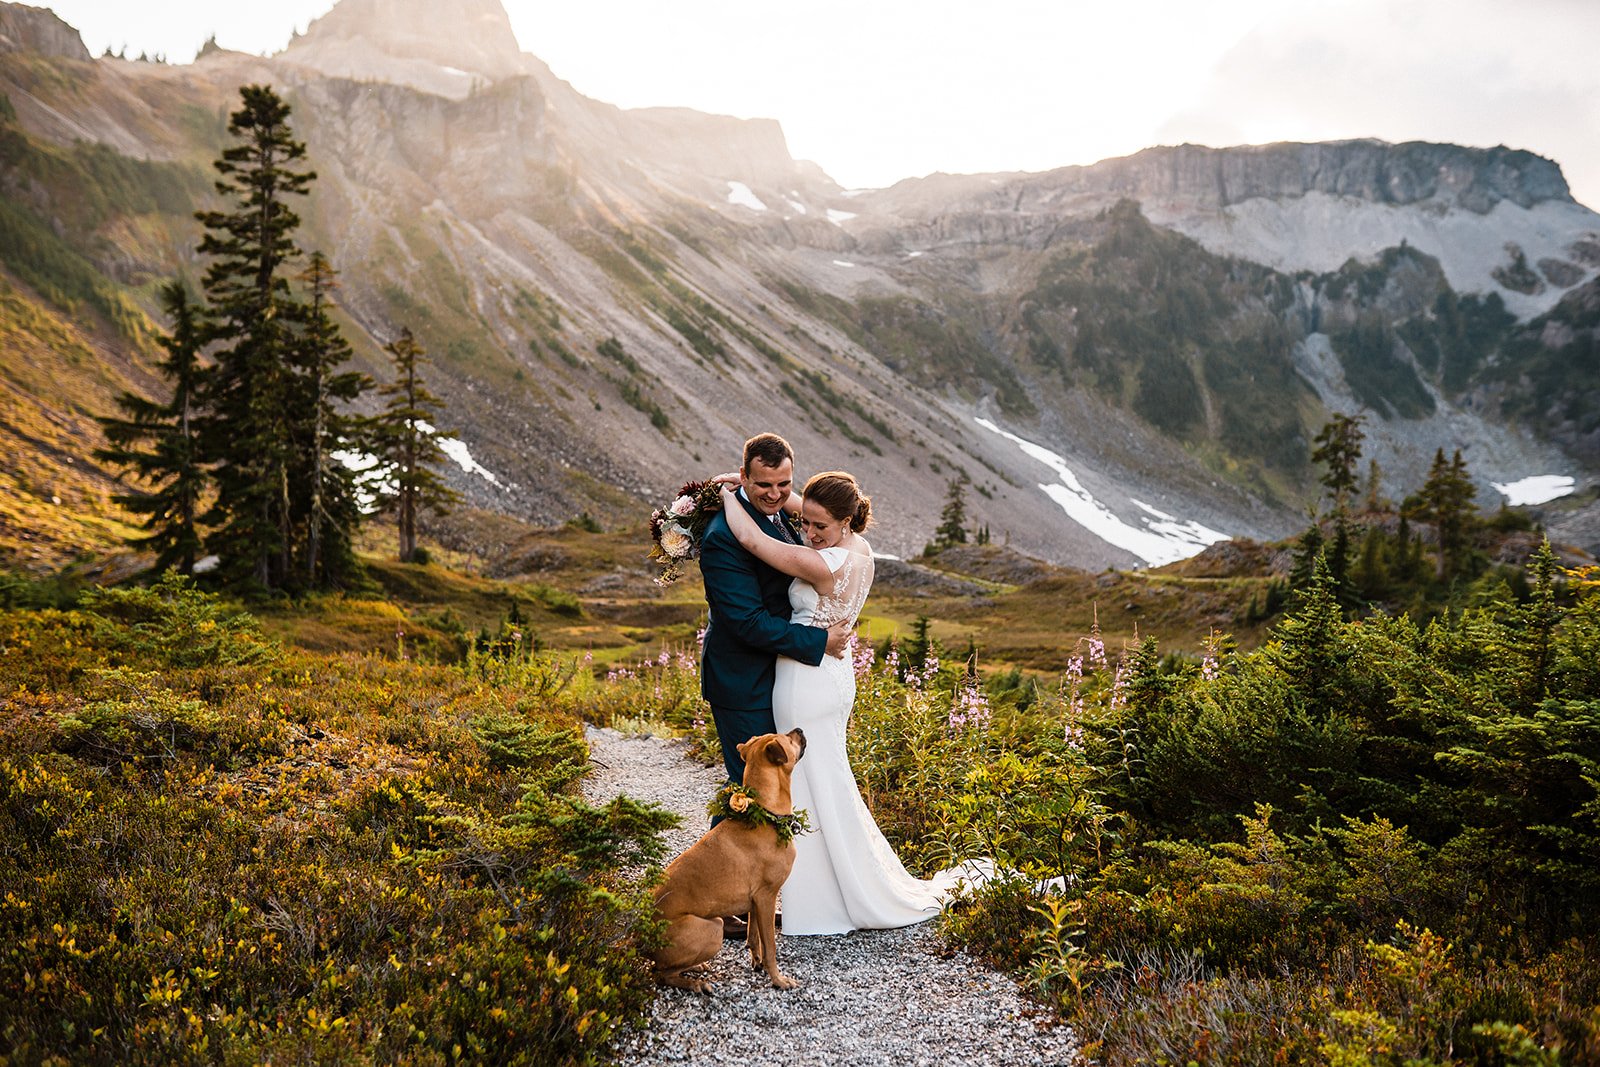 Emily_Ian_North_Cascades_Elopement_The_Foxes_Photography_279.jpg